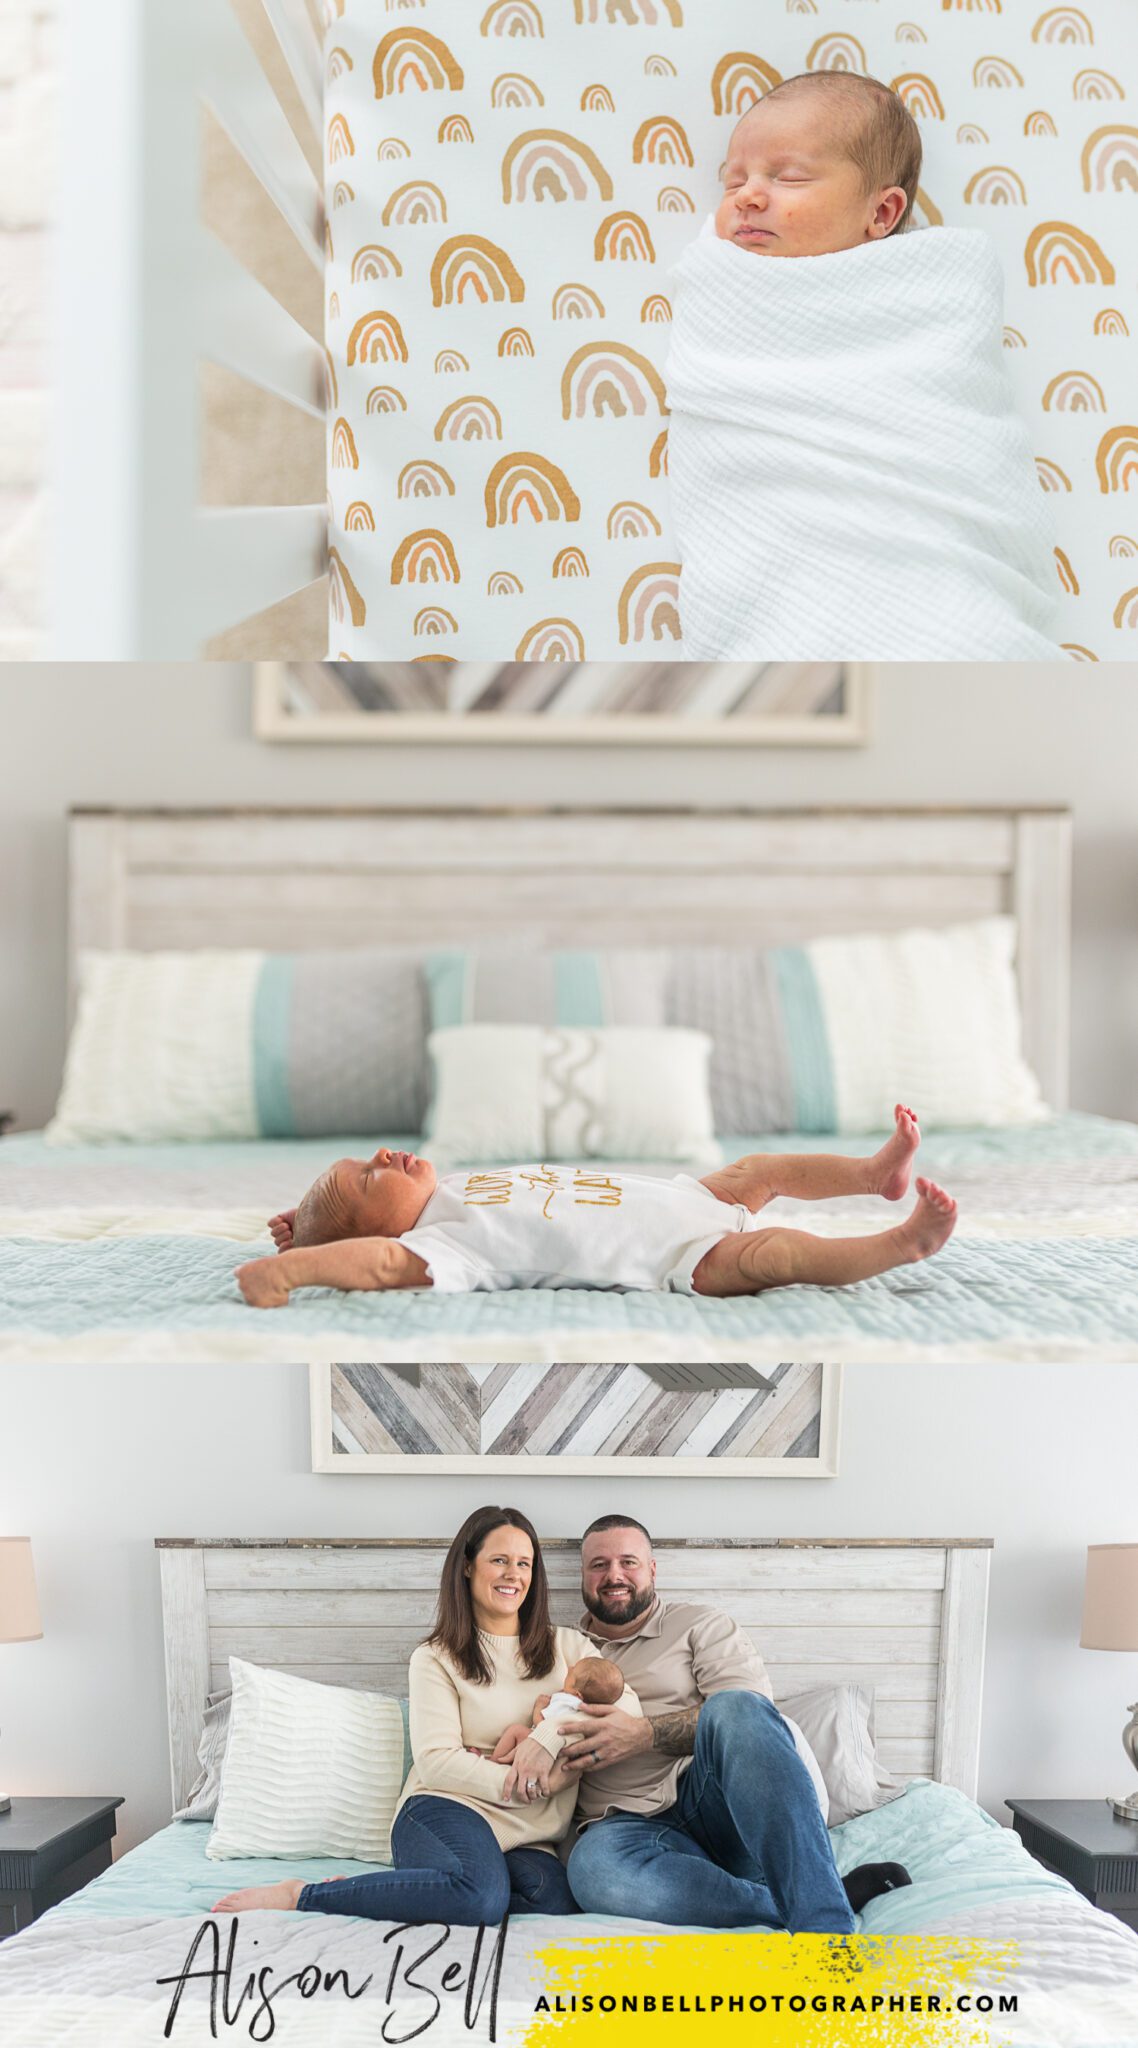 hawaii newborn photography by alison bell photographer. baby stretching on bed, with mom and dad, swaddled